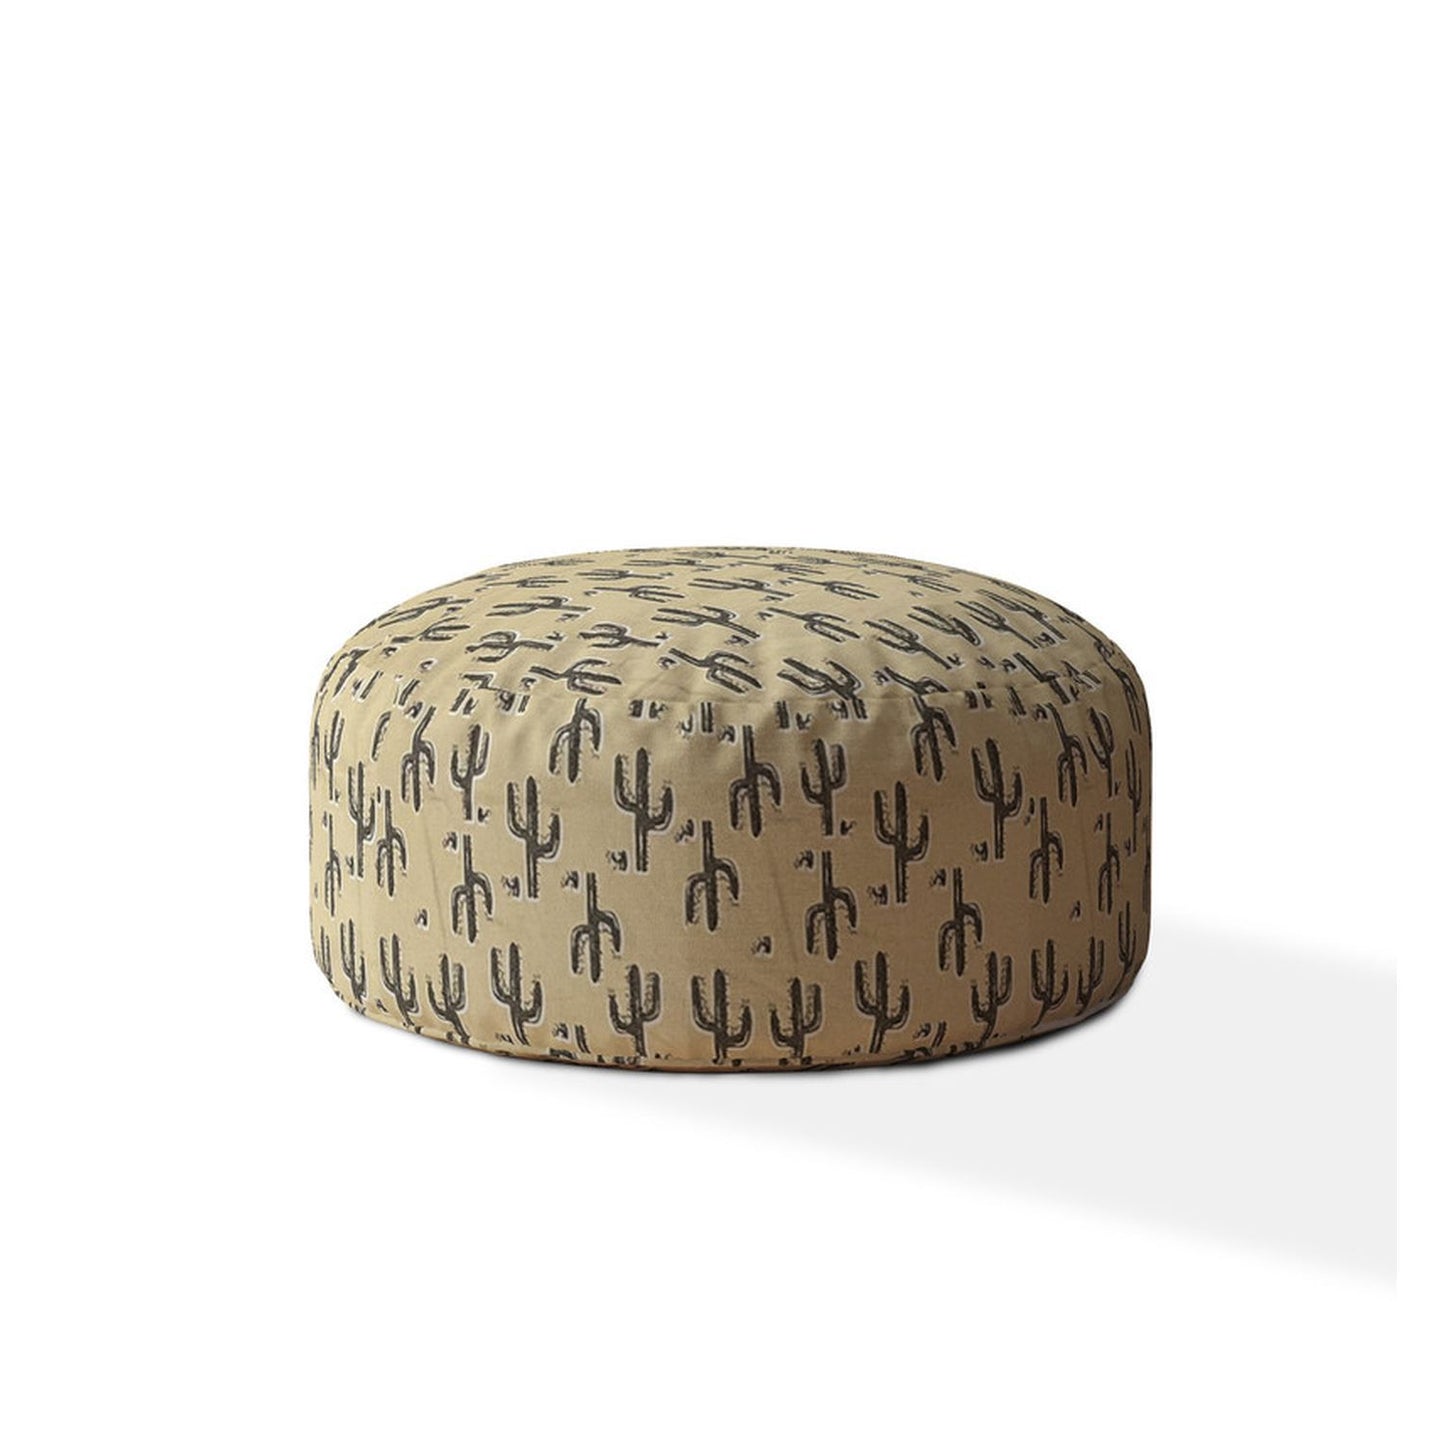 Indoor SAGUARO Blue/Taupe/Camel Tan Round Zipper Pouf - Cover Only - 24in dia x 20in tall